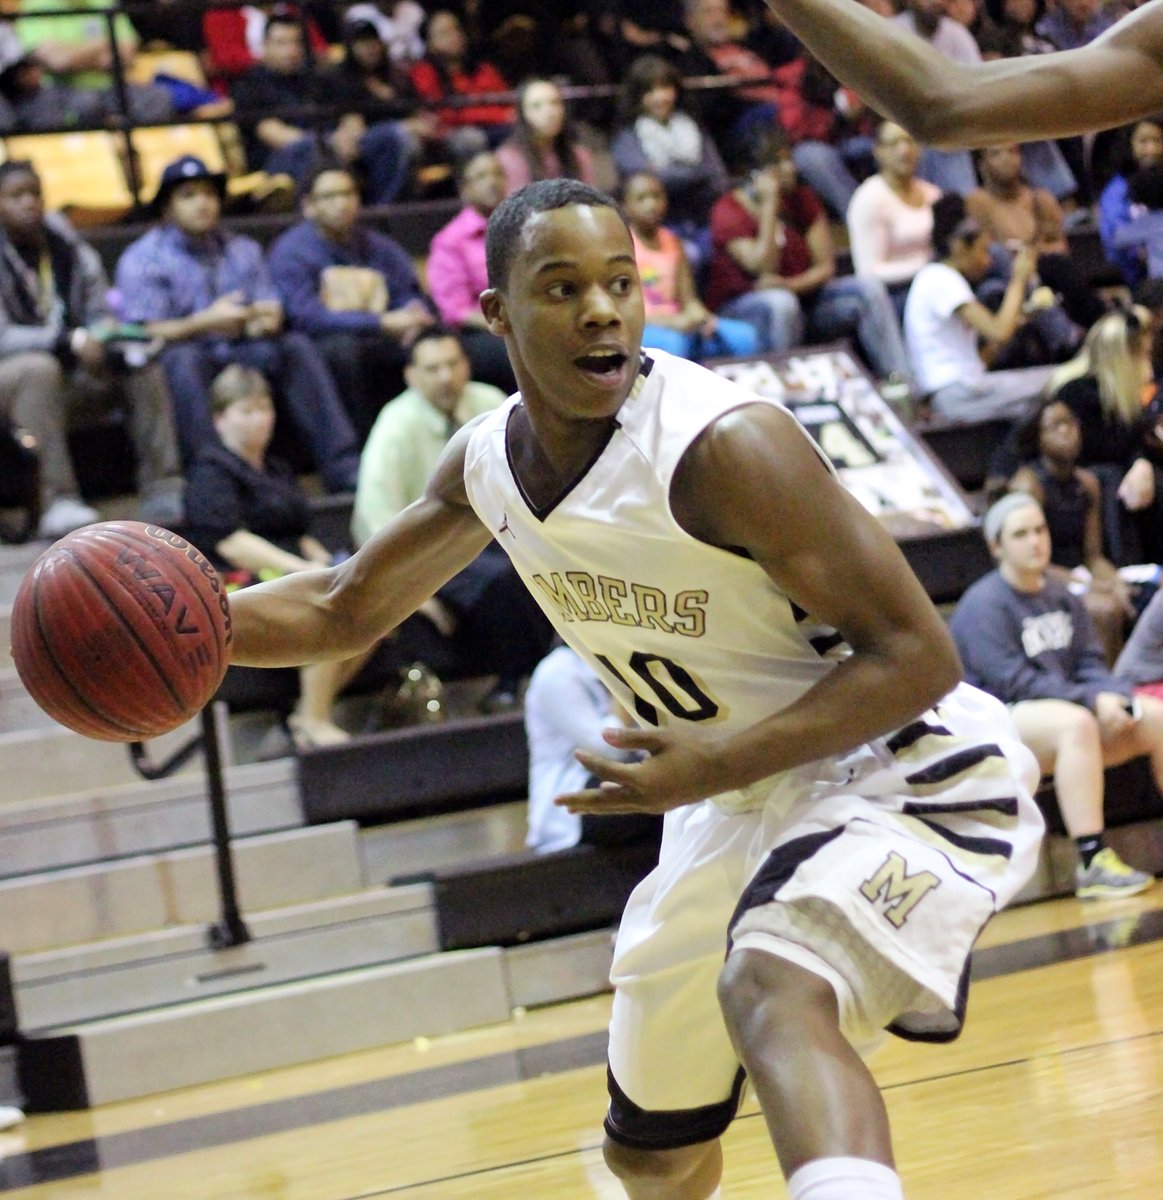 Torey Noel has been named the new head boys basketball coach at Midwest City High School. Noel is a Midwest City High School graduate who went on to play at Lamar University. He also previously served as an assistant at Midwest City and Choctaw high schools. #okpreps